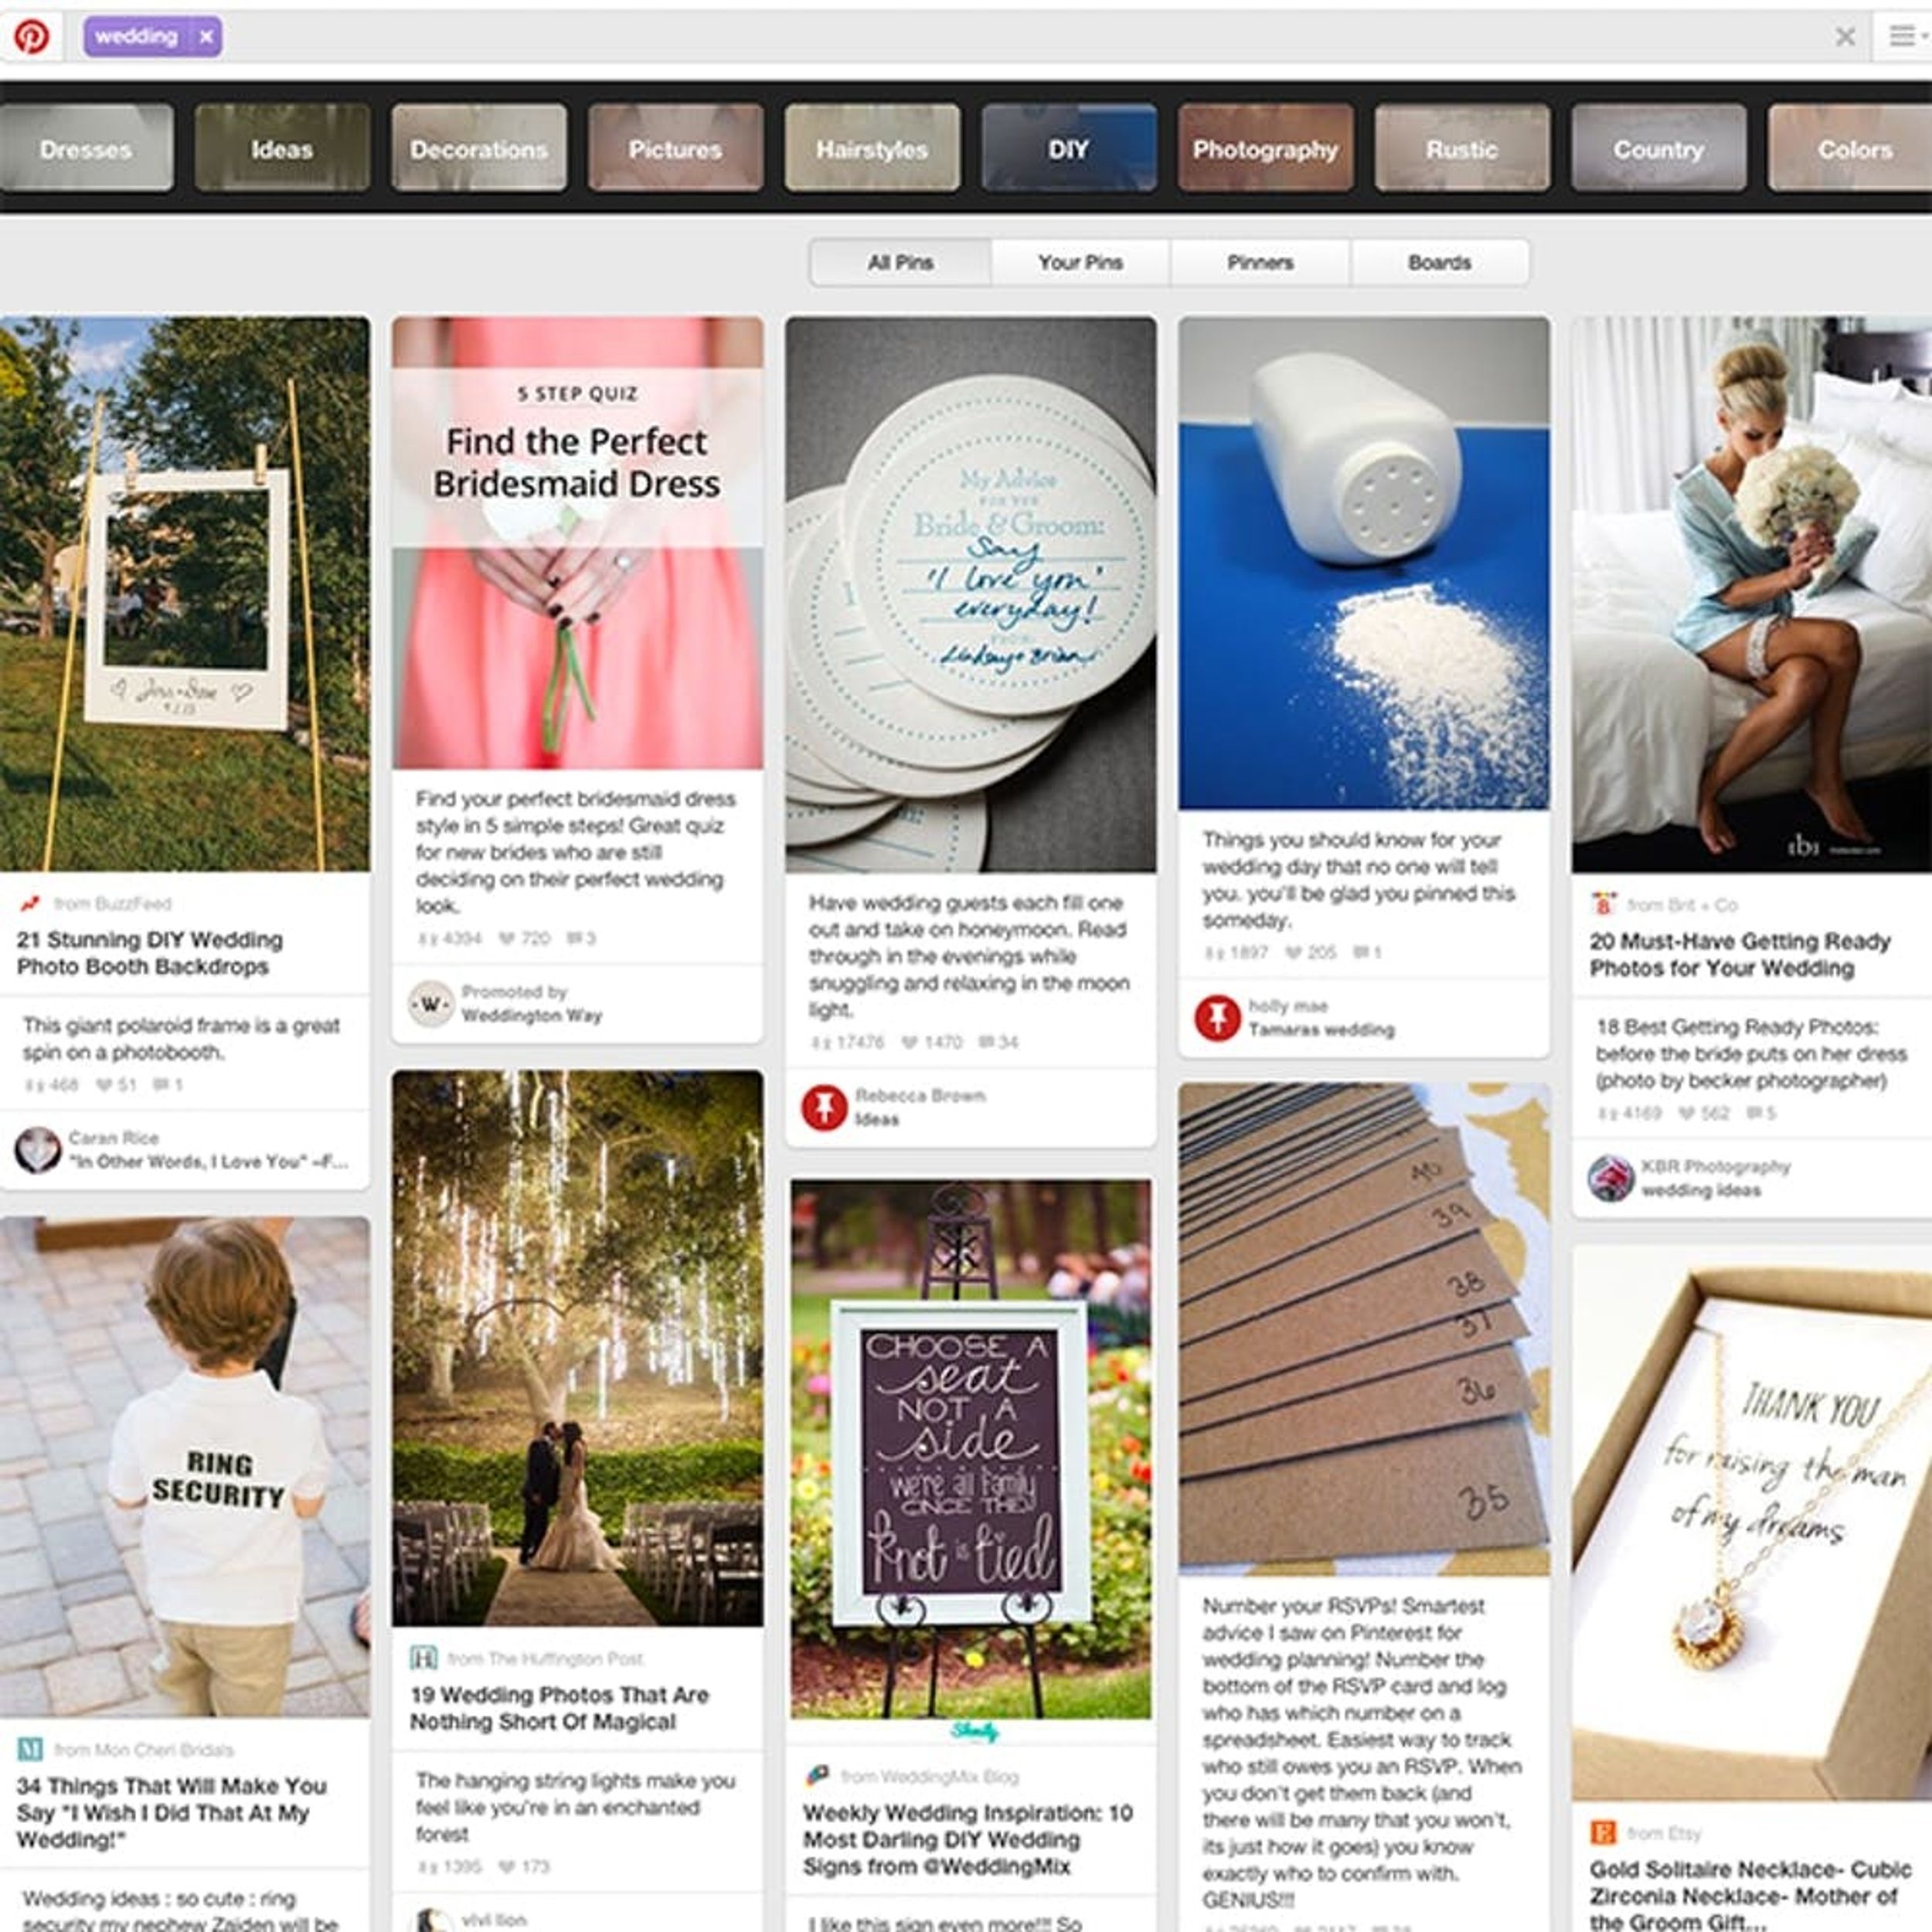 Why Brides Should Limit Pinterest Time + More Tips to Stay Sane During an Engagement